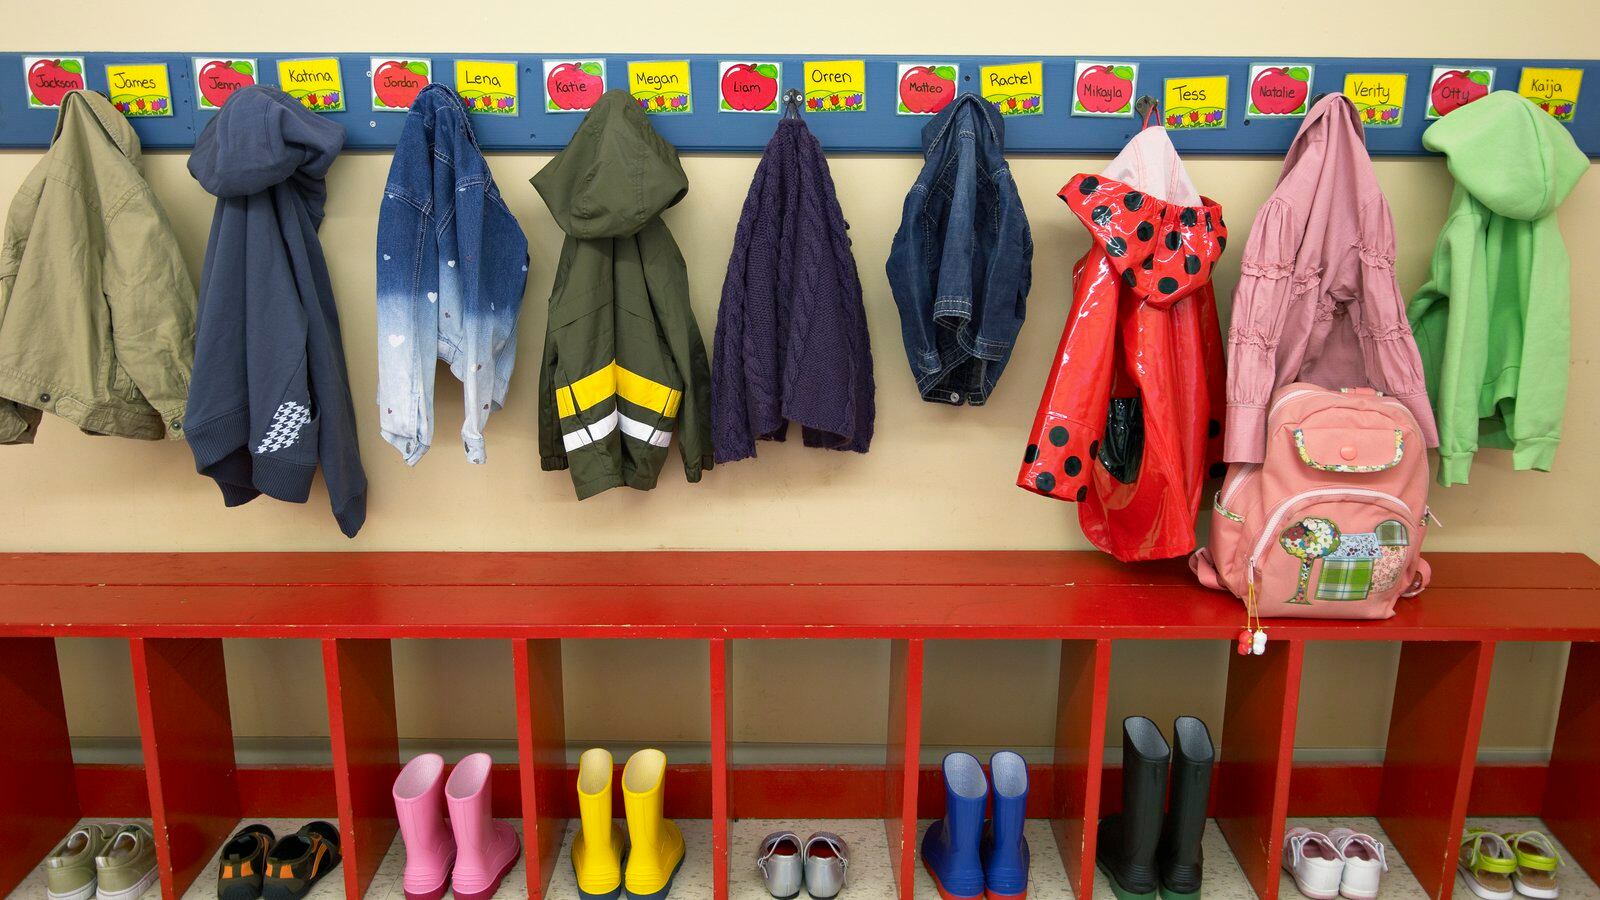 Preschoolers’ jackets and boots or shoes are lined up in their cubbies.